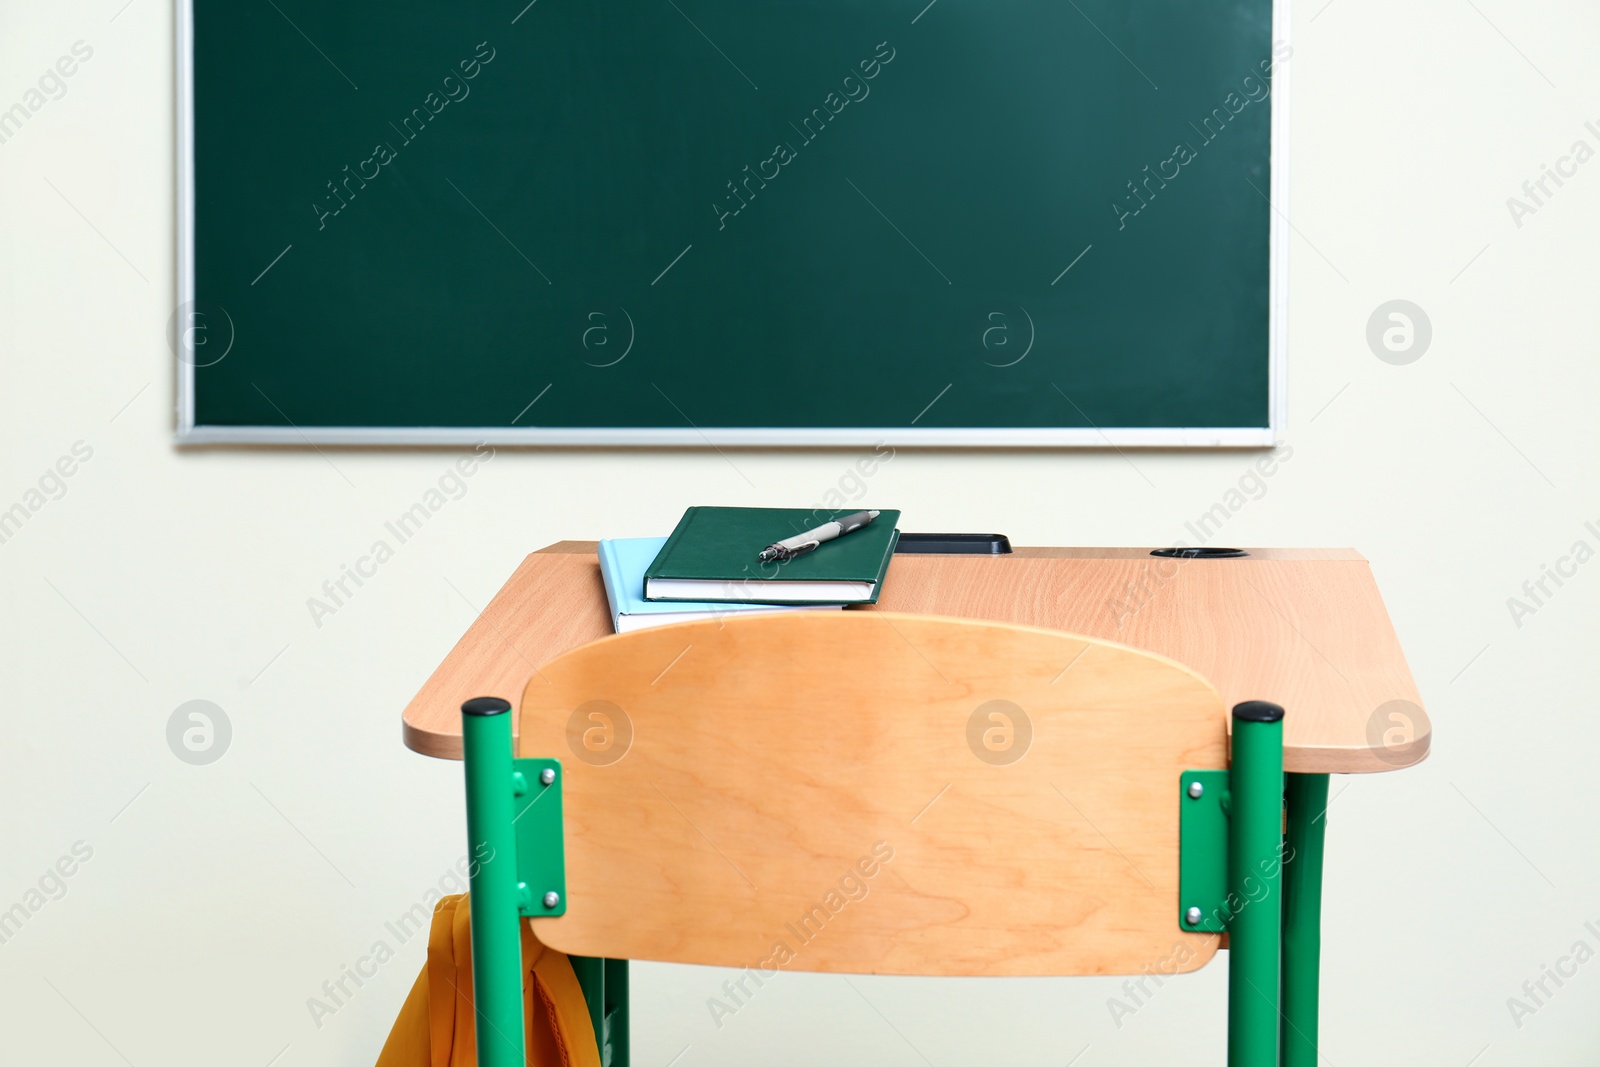 Photo of School desk with stationery and bag near chalkboard in classroom